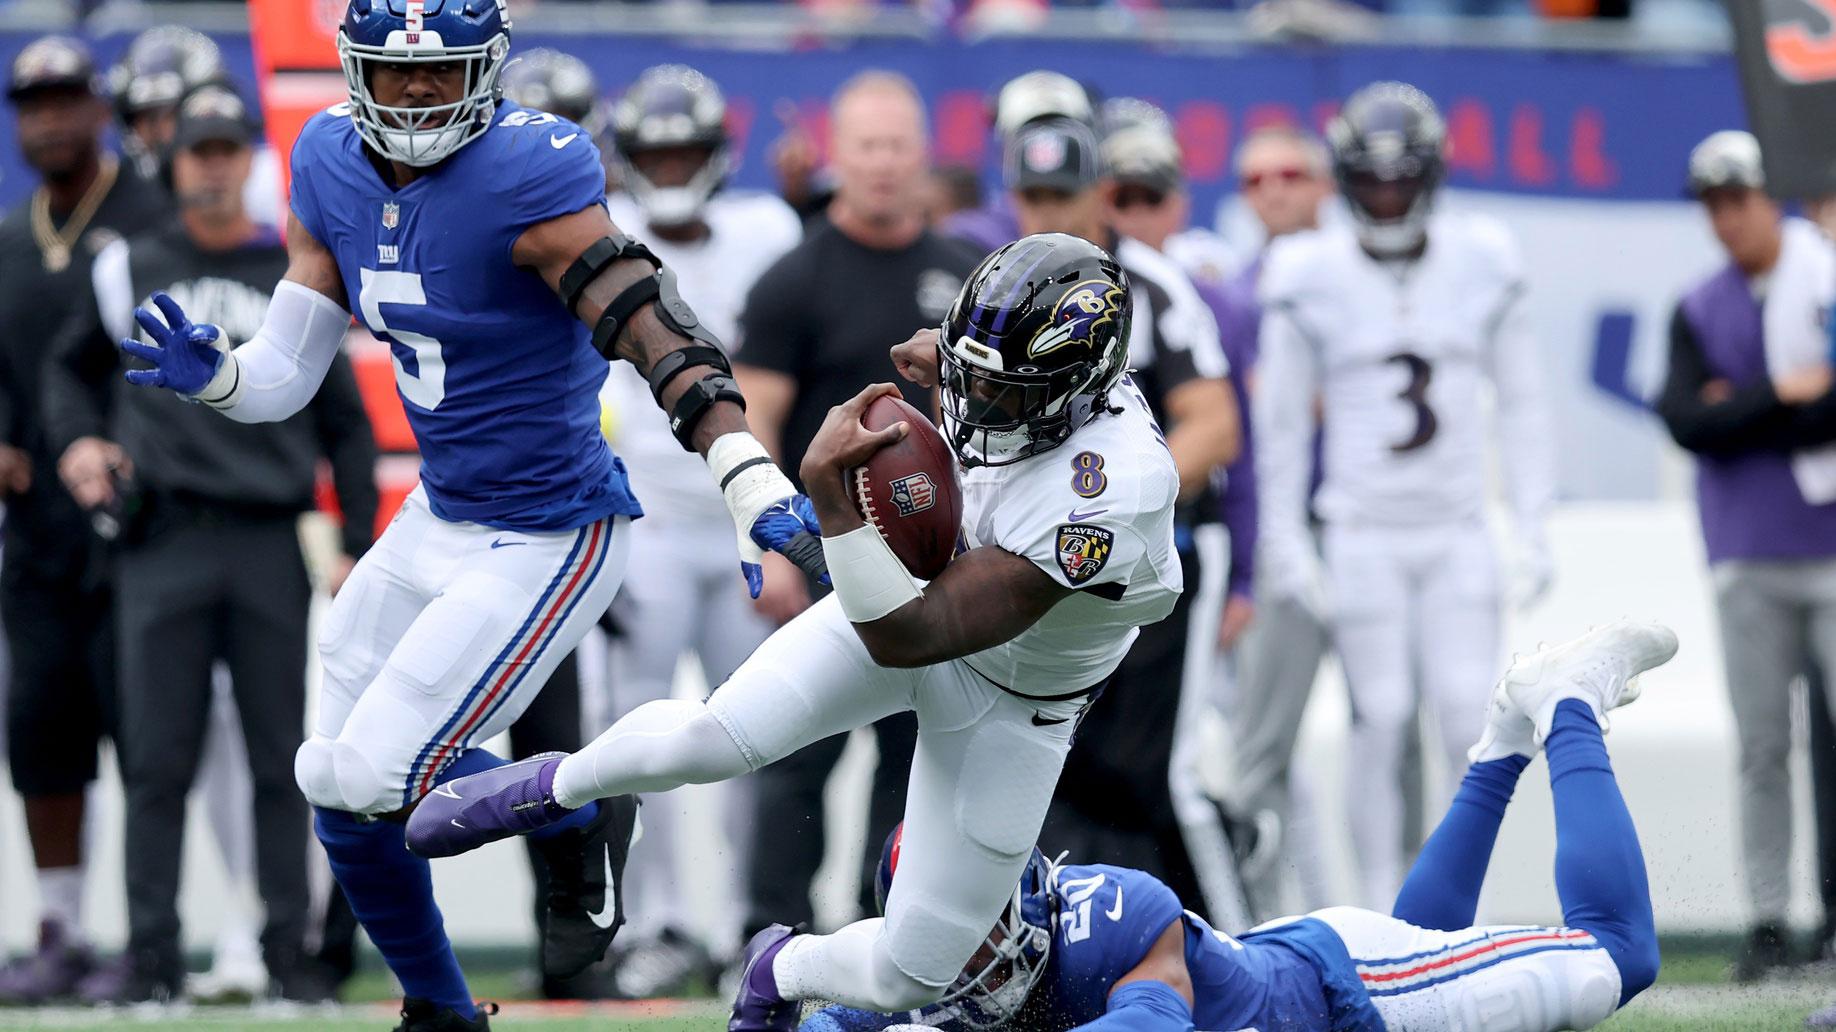 Oct 16, 2022; East Rutherford, New Jersey, USA; Baltimore Ravens quarterback Lamar Jackson (8) runs with the ball against New York Giants safety Julian Love (20) and defensive end Kayvon Thibodeaux (5) during the first quarter at MetLife Stadium. / Brad Penner-USA TODAY Sports